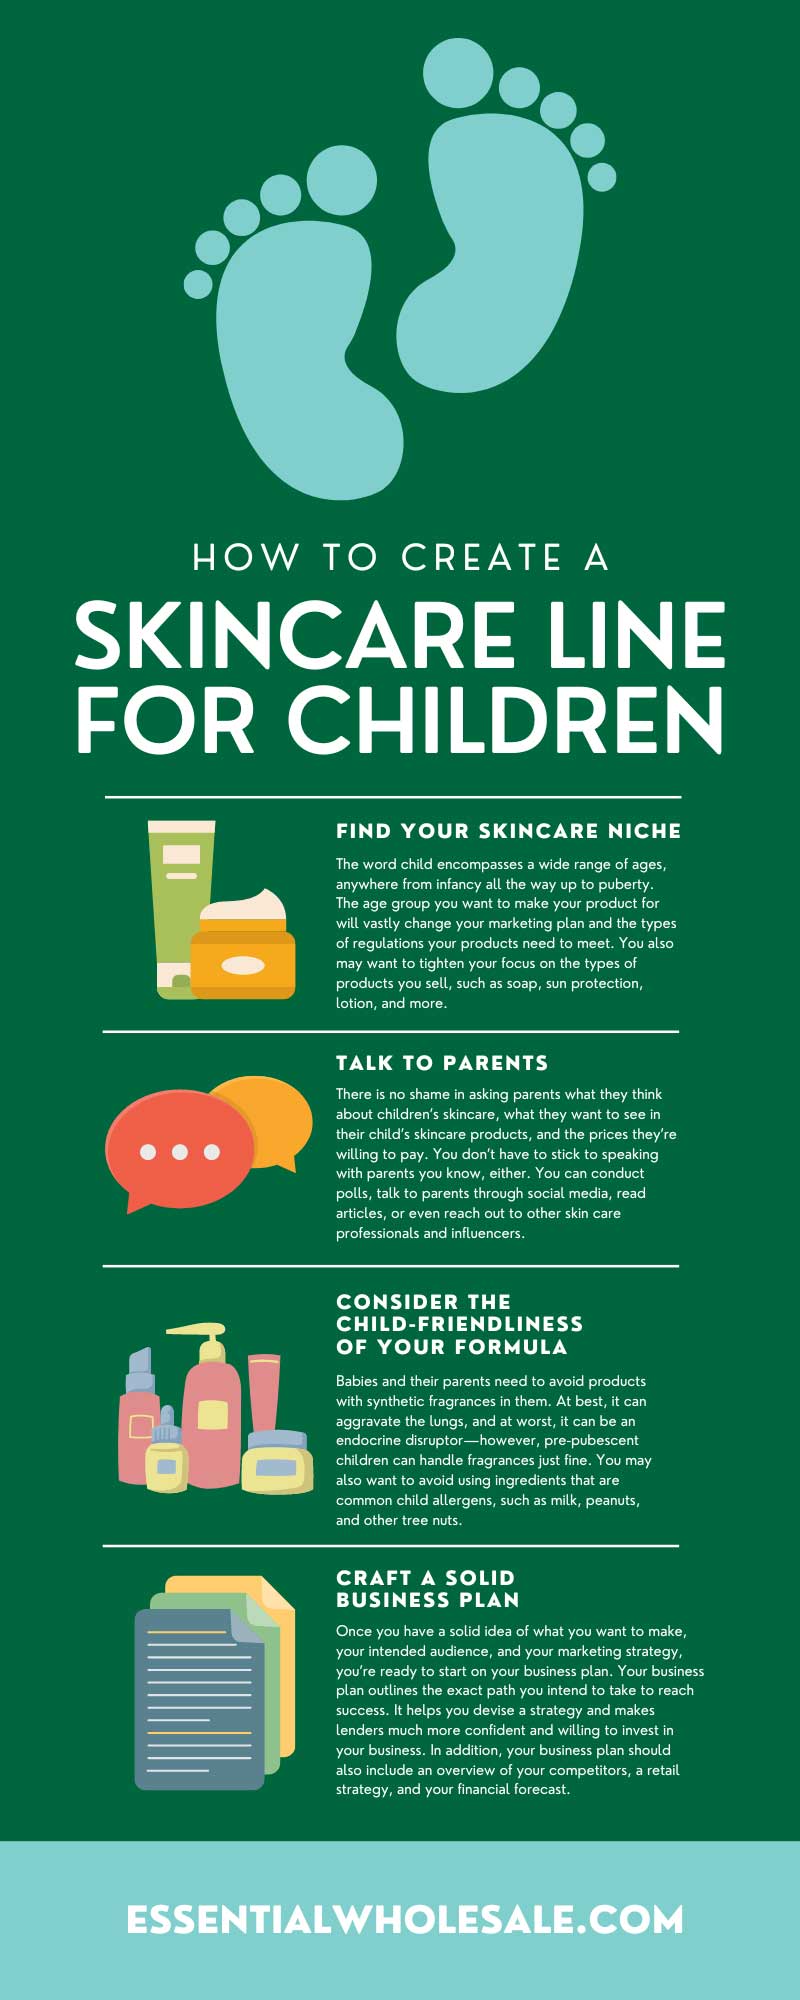 How To Create a Skincare Line for Children